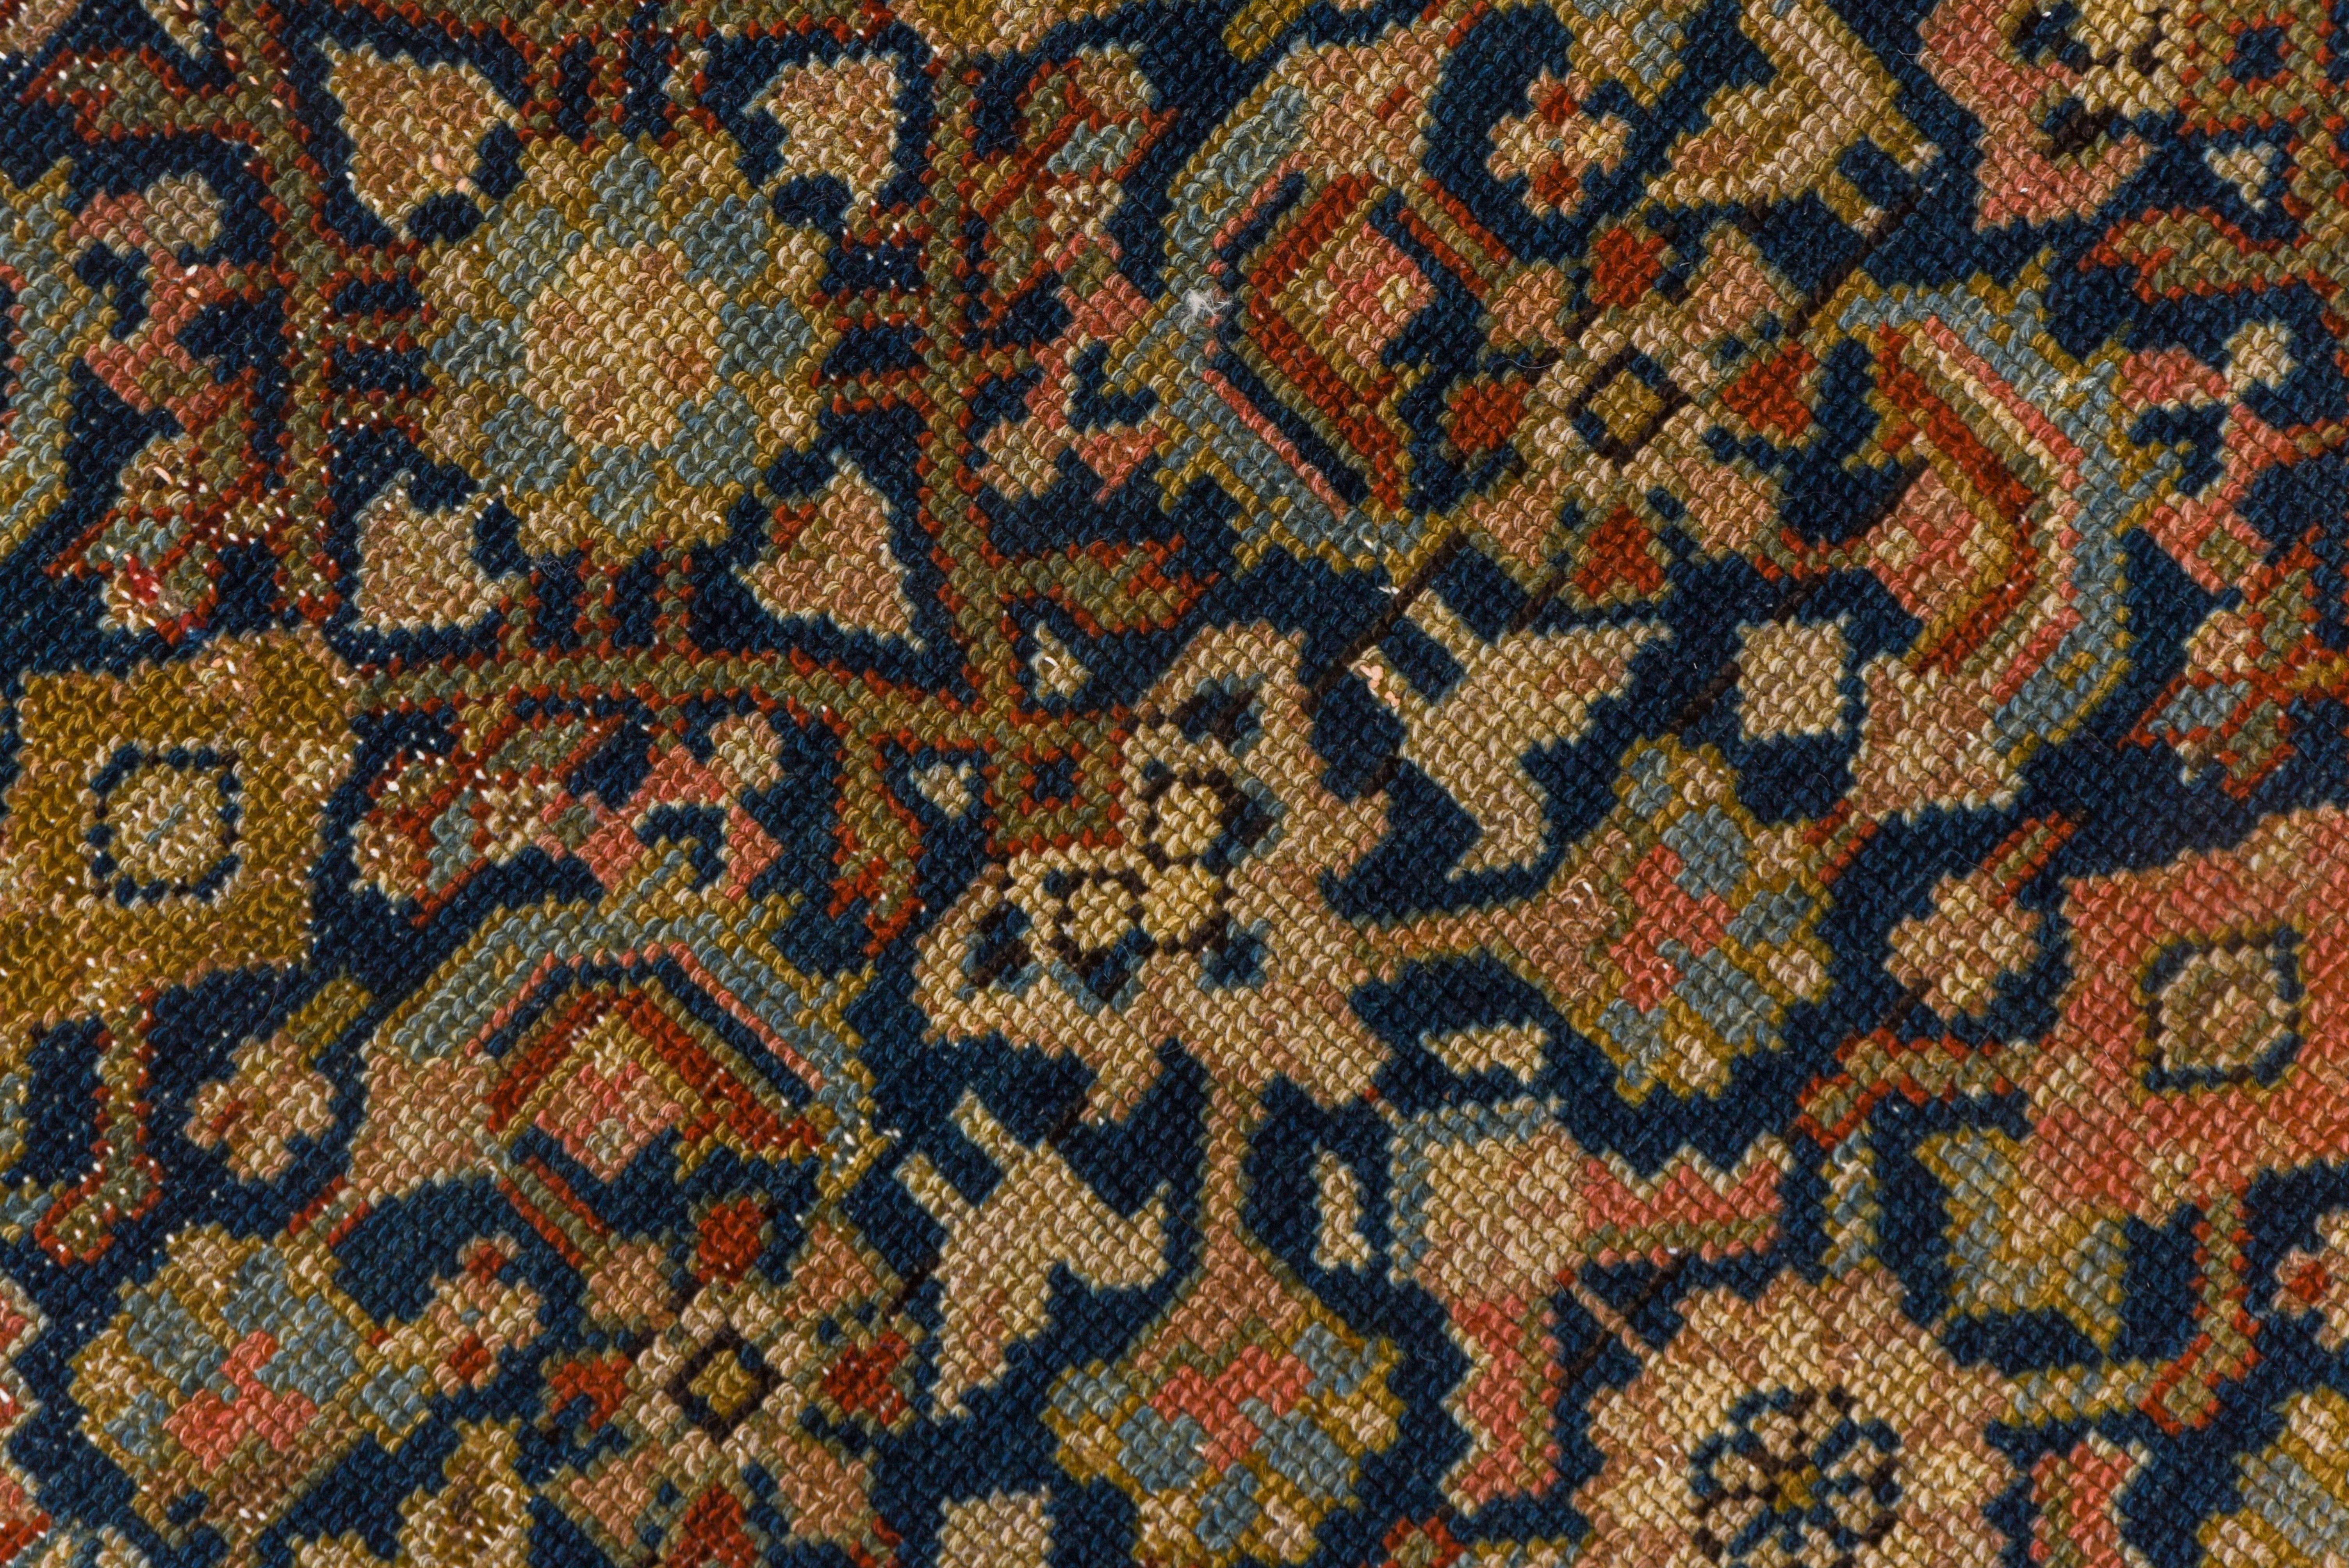 This west Persian long scatter ryg shows an allover Herati pattern detailed in rust and pale green, with numerous tiny birds. On a field abrashing from navy to chocolate. The main beige border shows palmettes and minute botehs on a tendril meander.